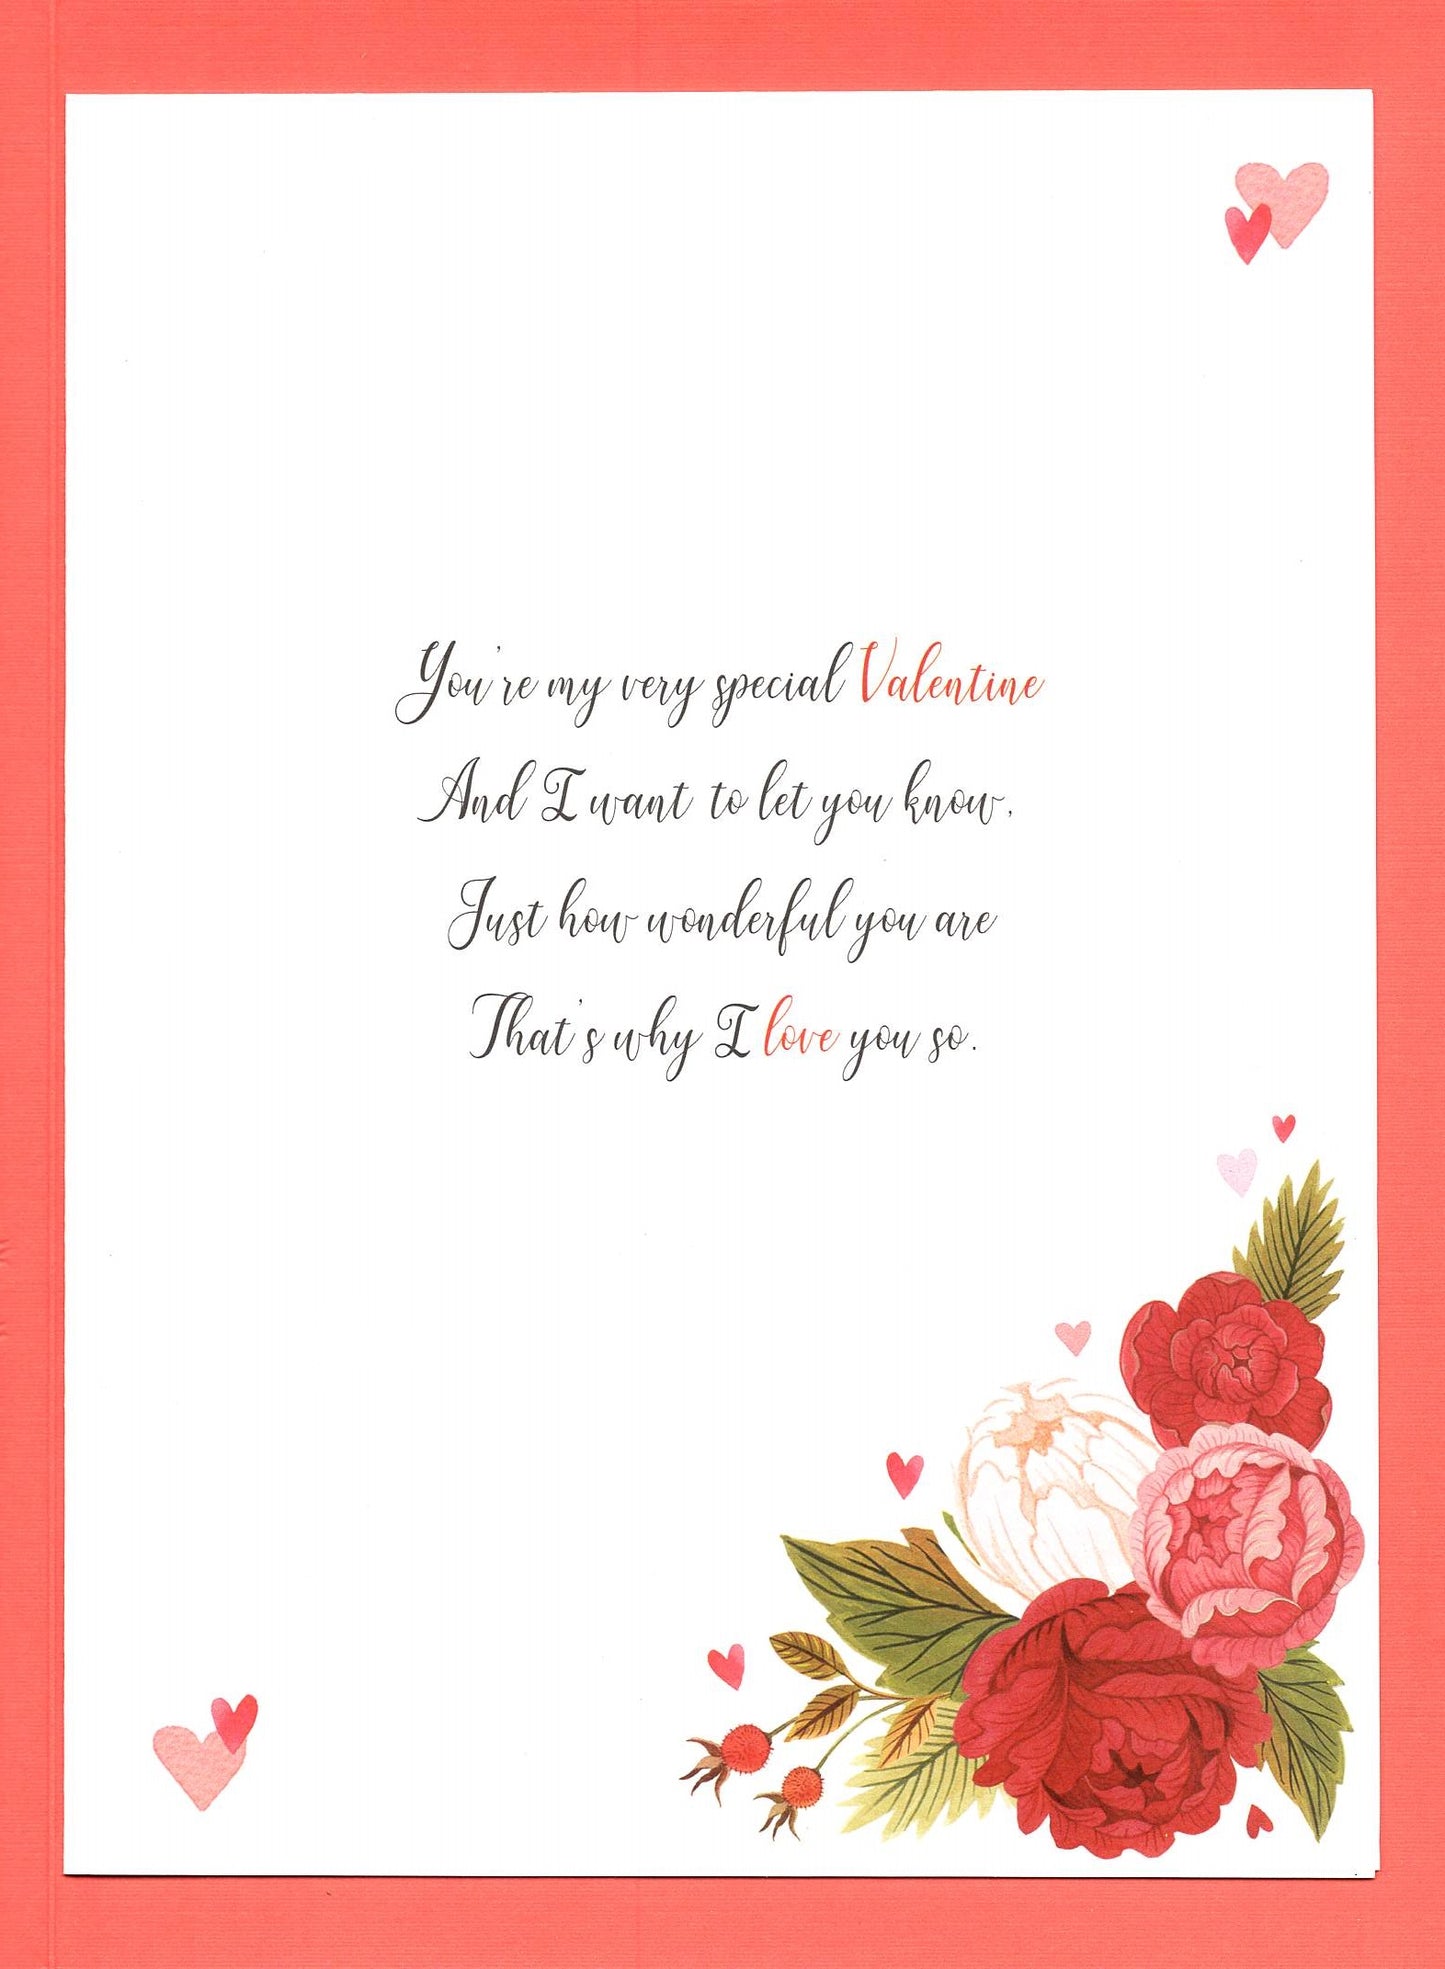 Beautiful Wife Perfect Pink Posies Valentines Day Large Greeting Card